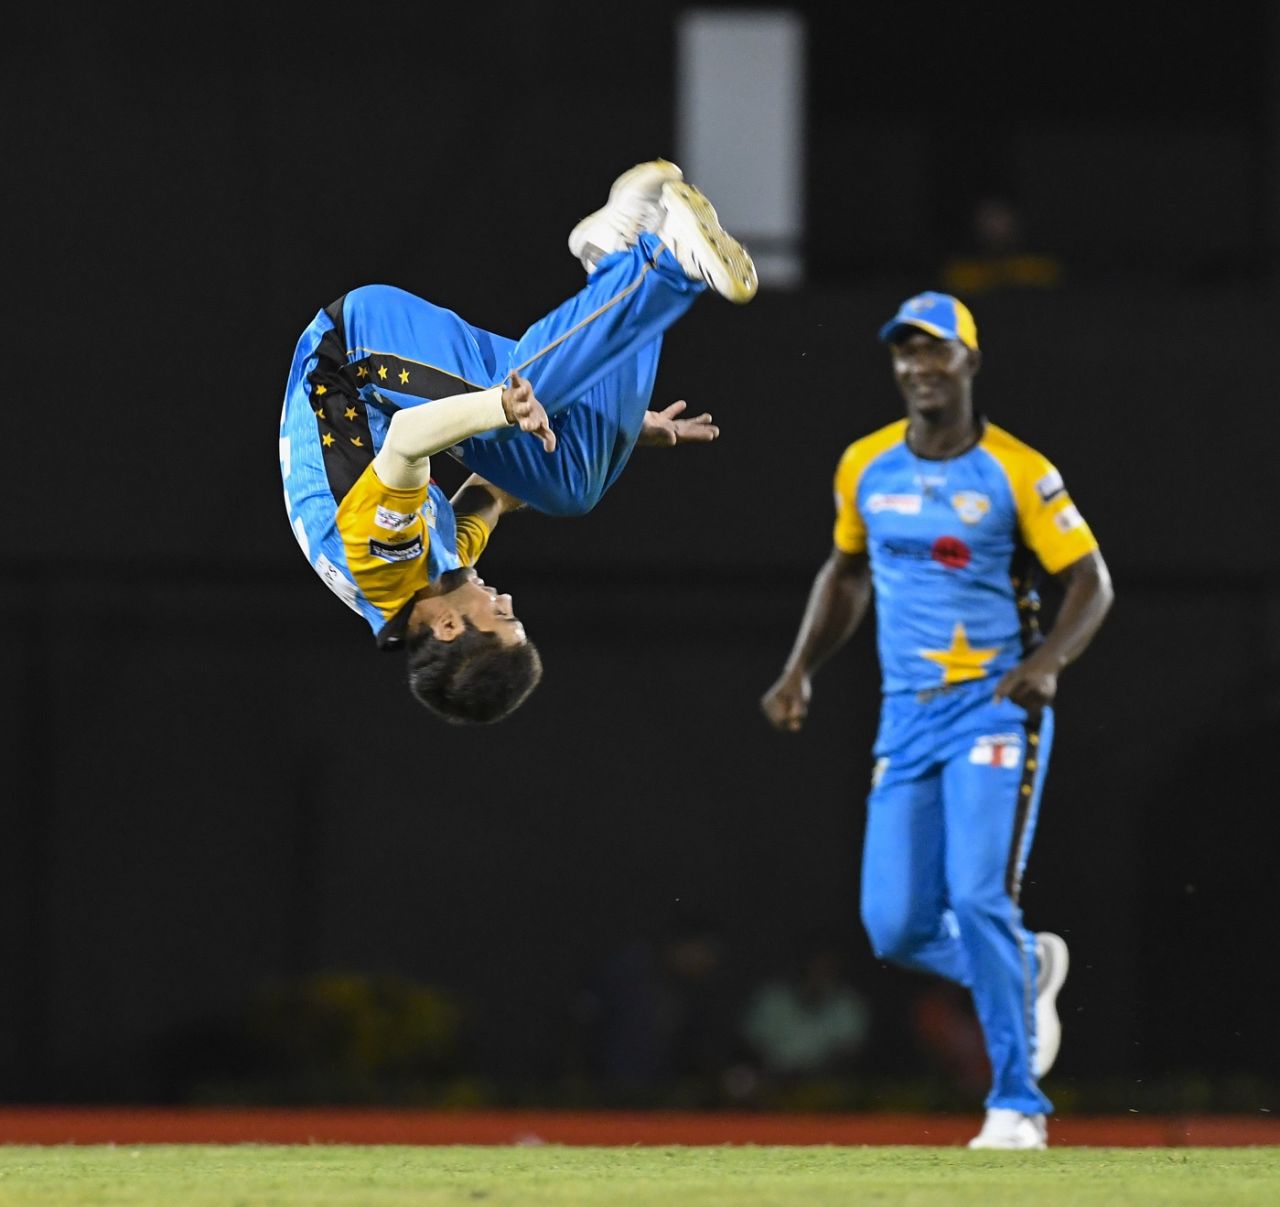 Qais Ahmed does a reverse somersault, Stars v Tridents, CPL 2018, St Lucia, August 17, 2018